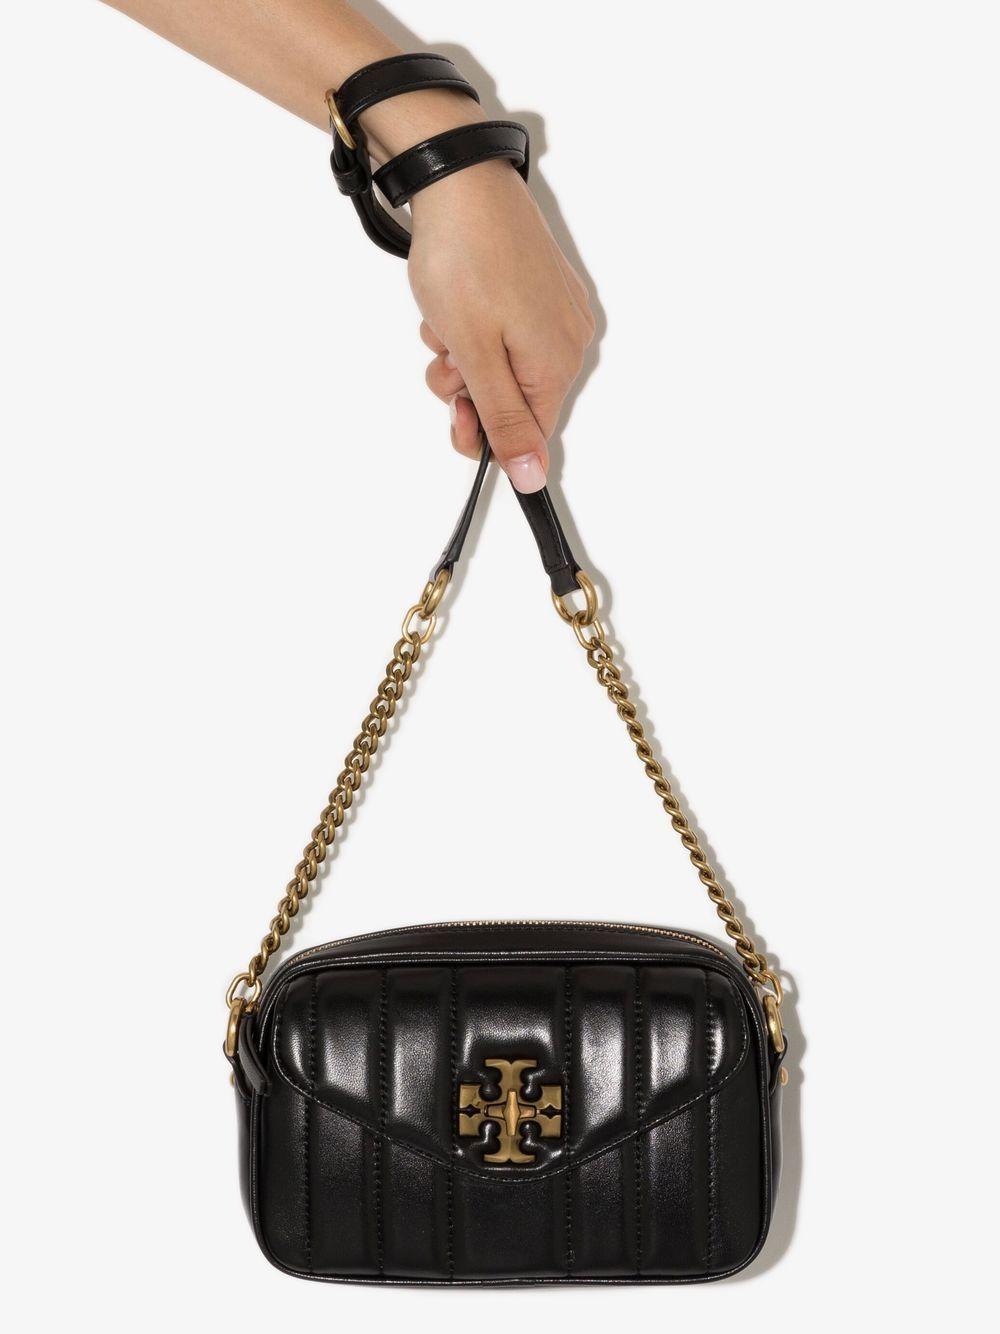 Tory Burch Kira Quilted Camera Bag in Black